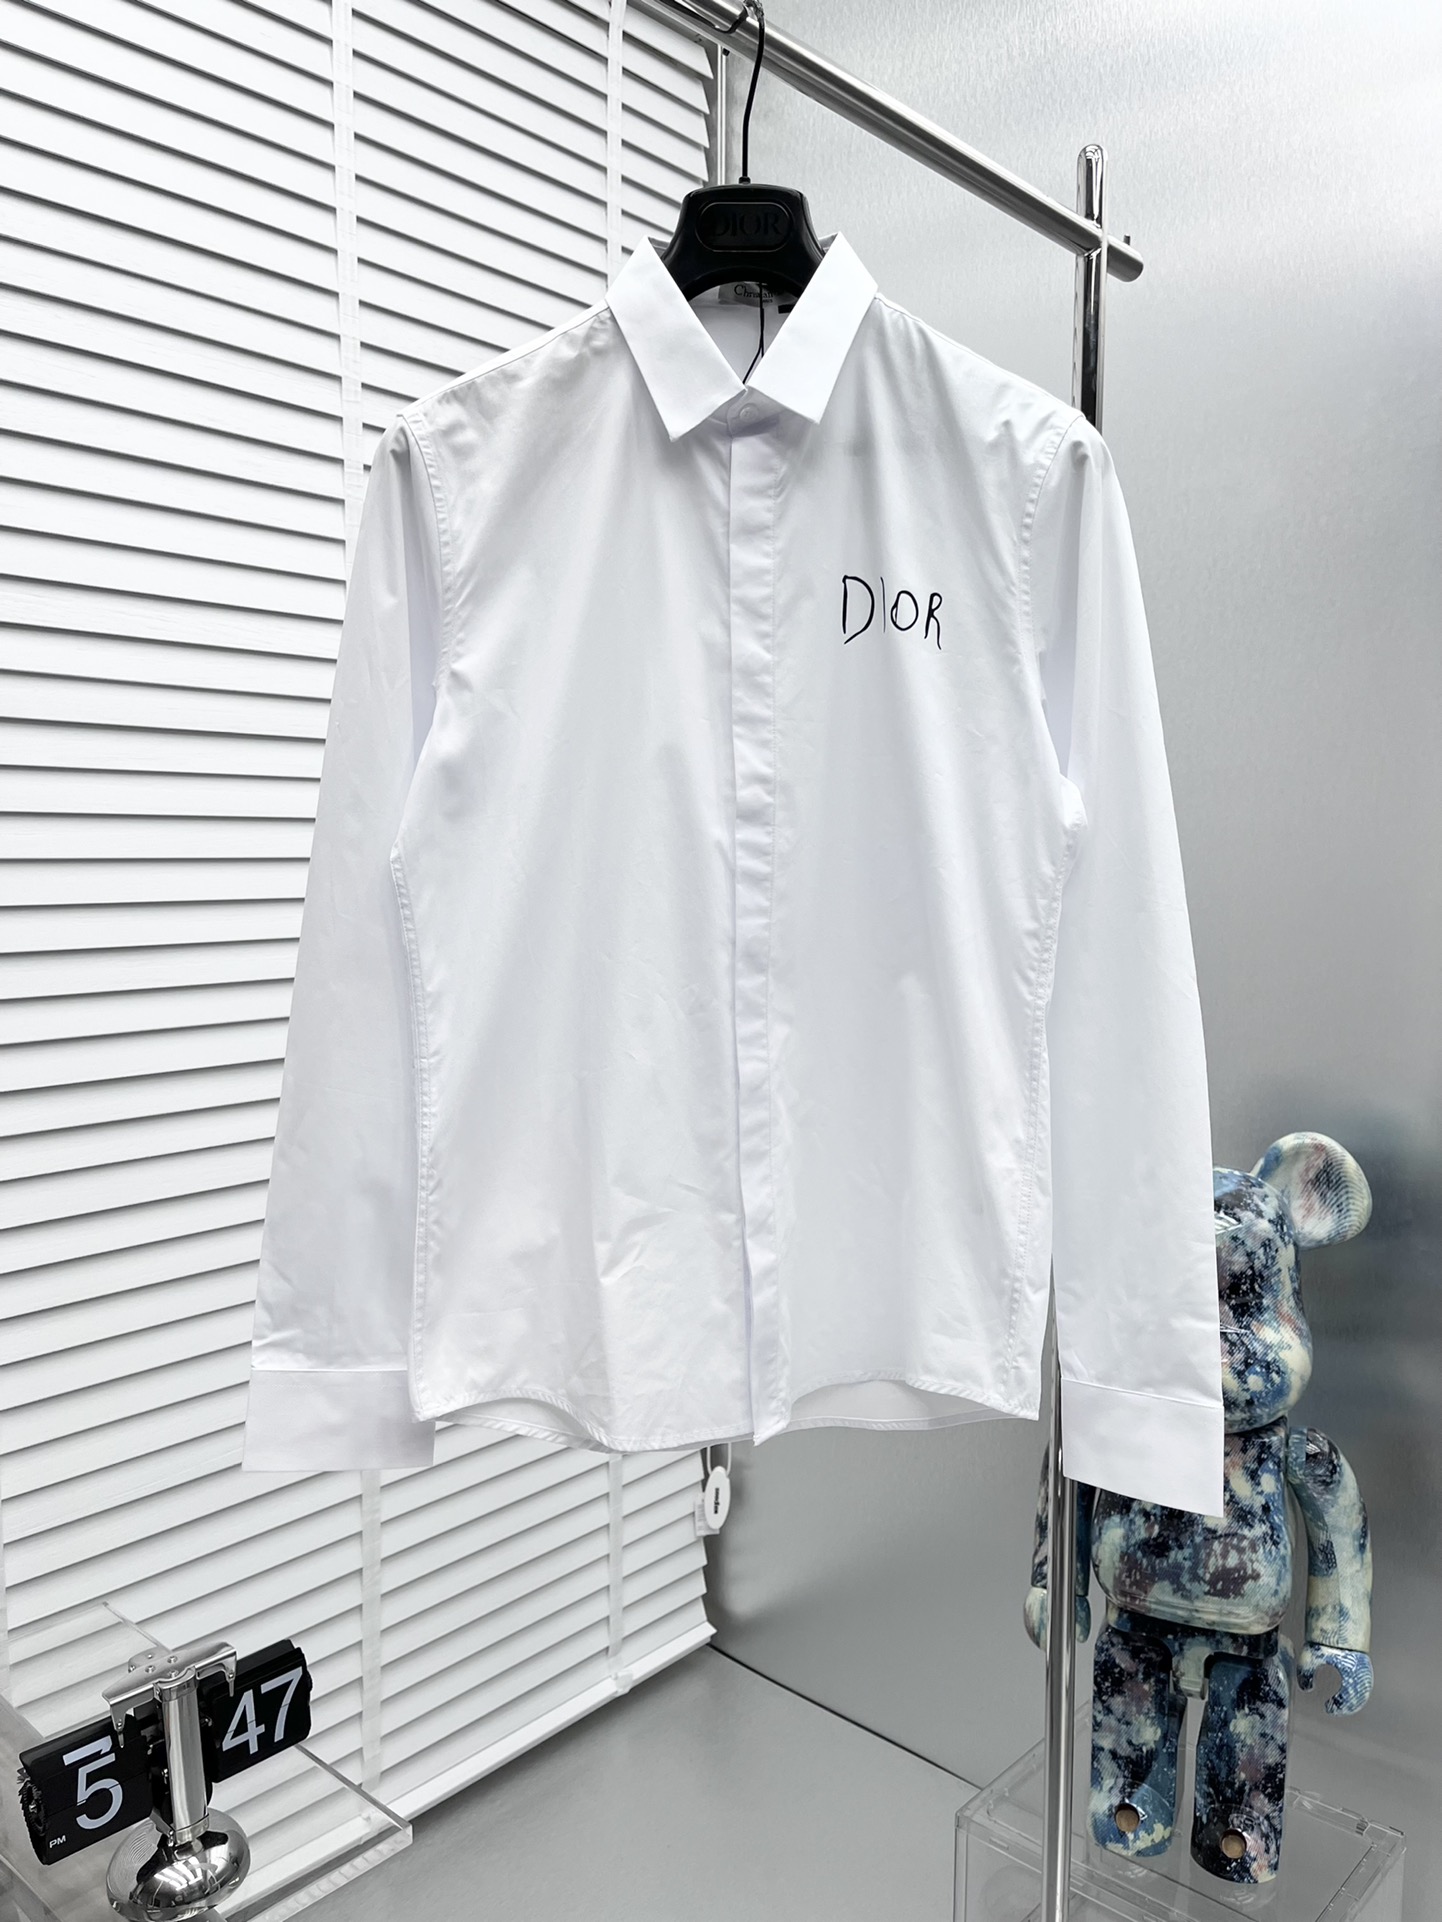 Dior Clothing Shirts & Blouses Supplier in China
 Men Long Sleeve